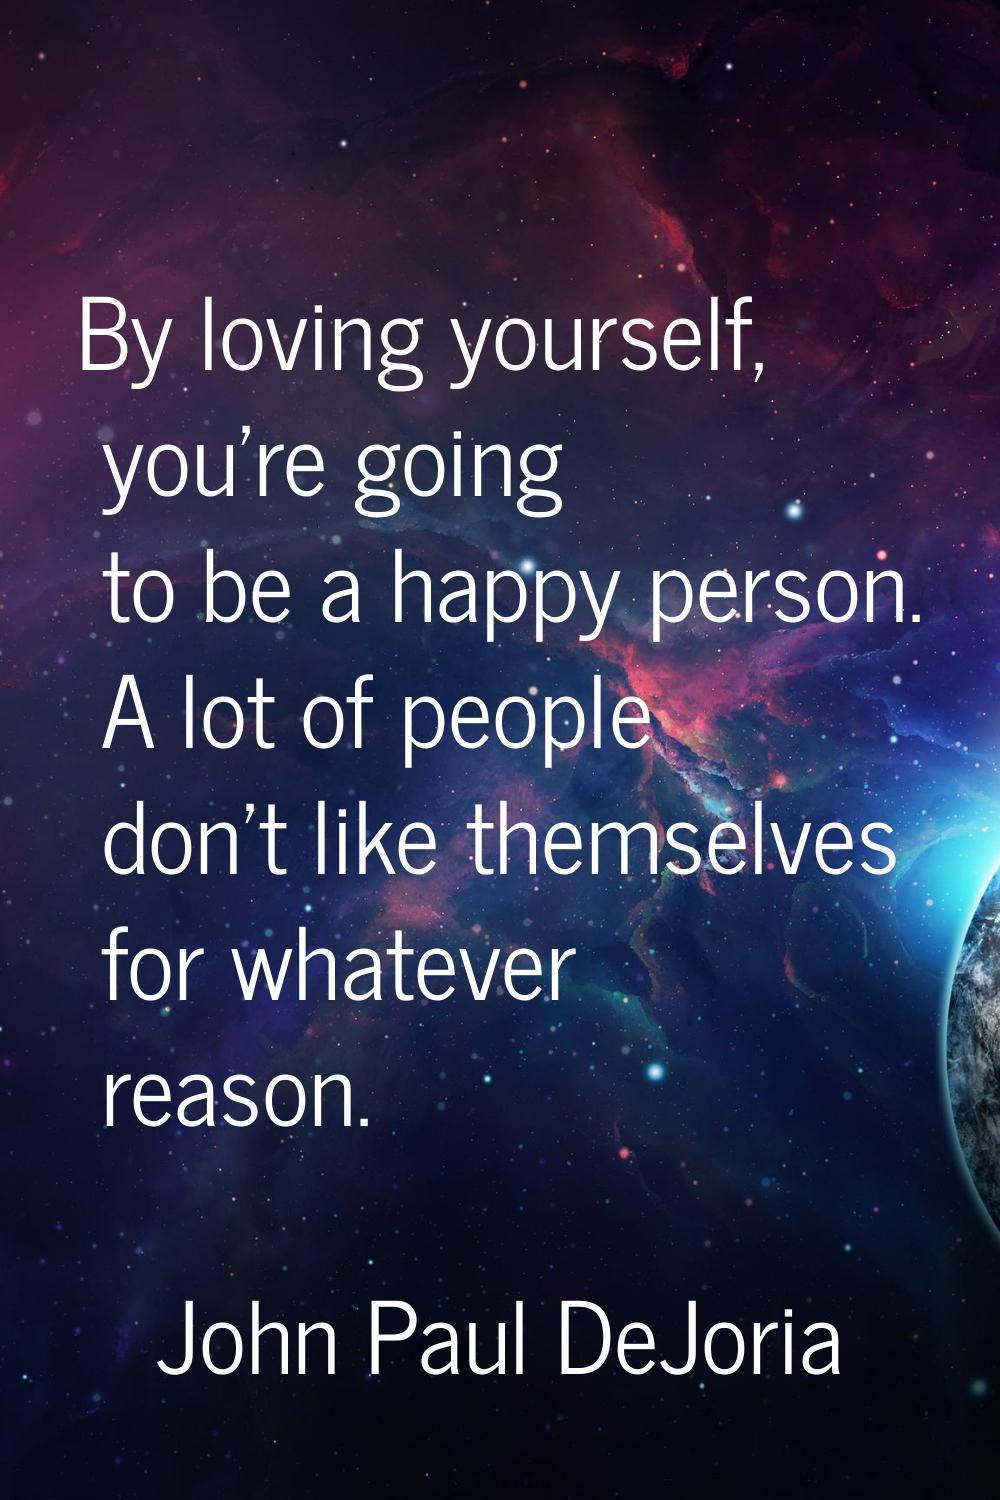 By loving yourself, you're going to be a happy person. A lot of people don't like themselves for wh